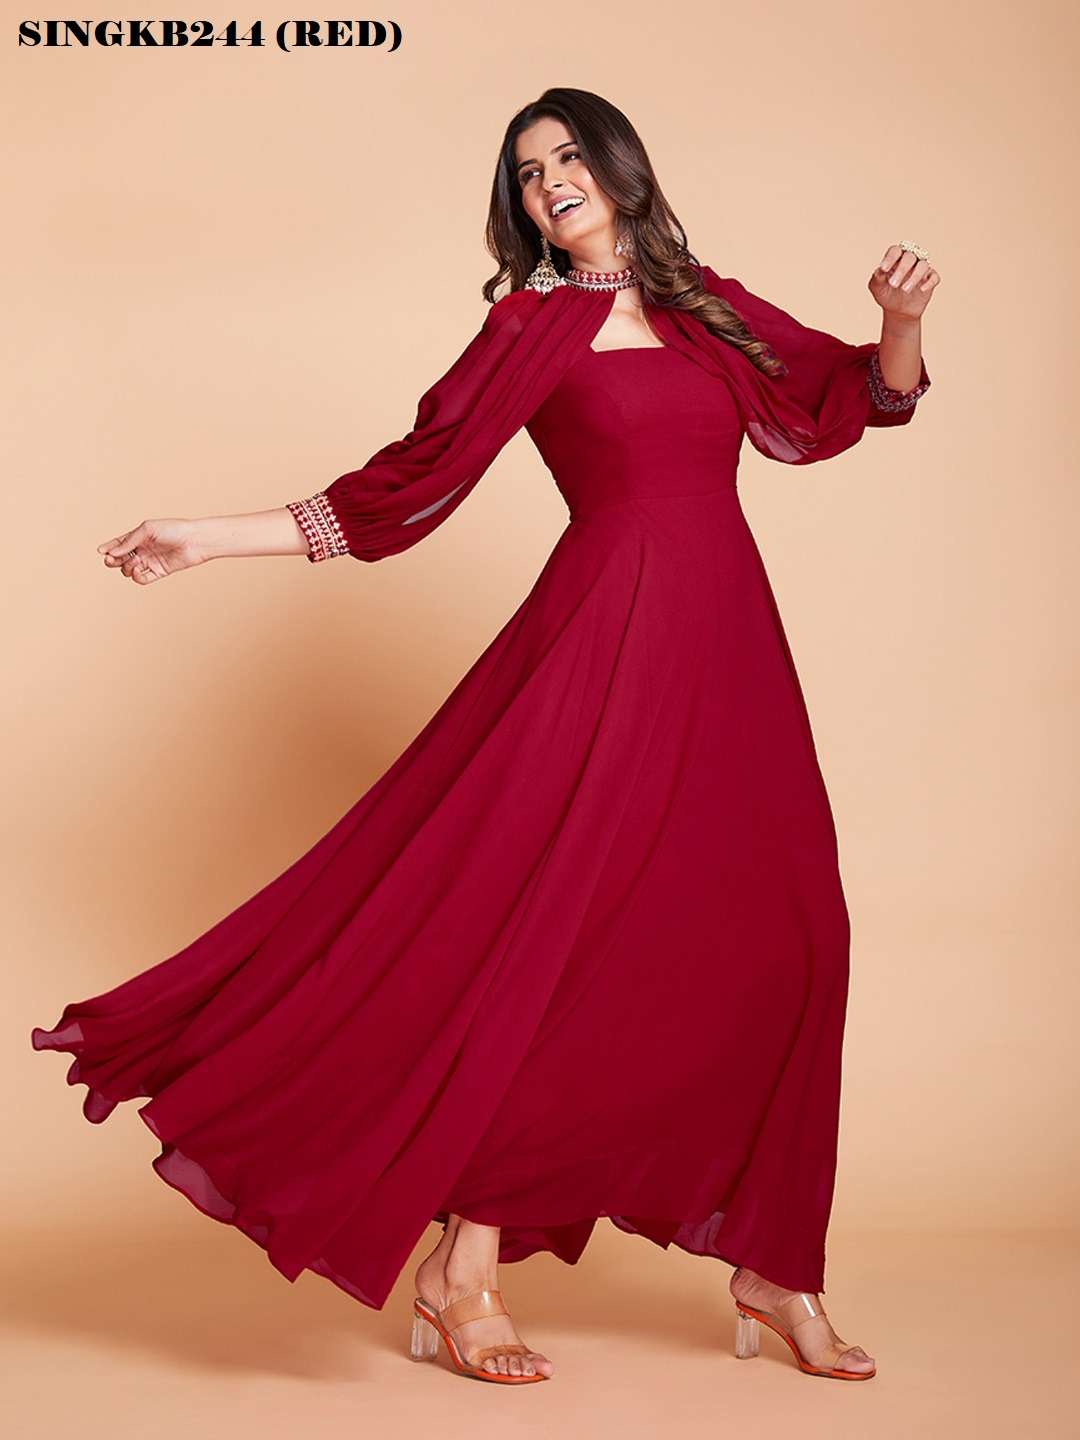 arya designs singkb244 red color long gown with beautiful sleeves combo set